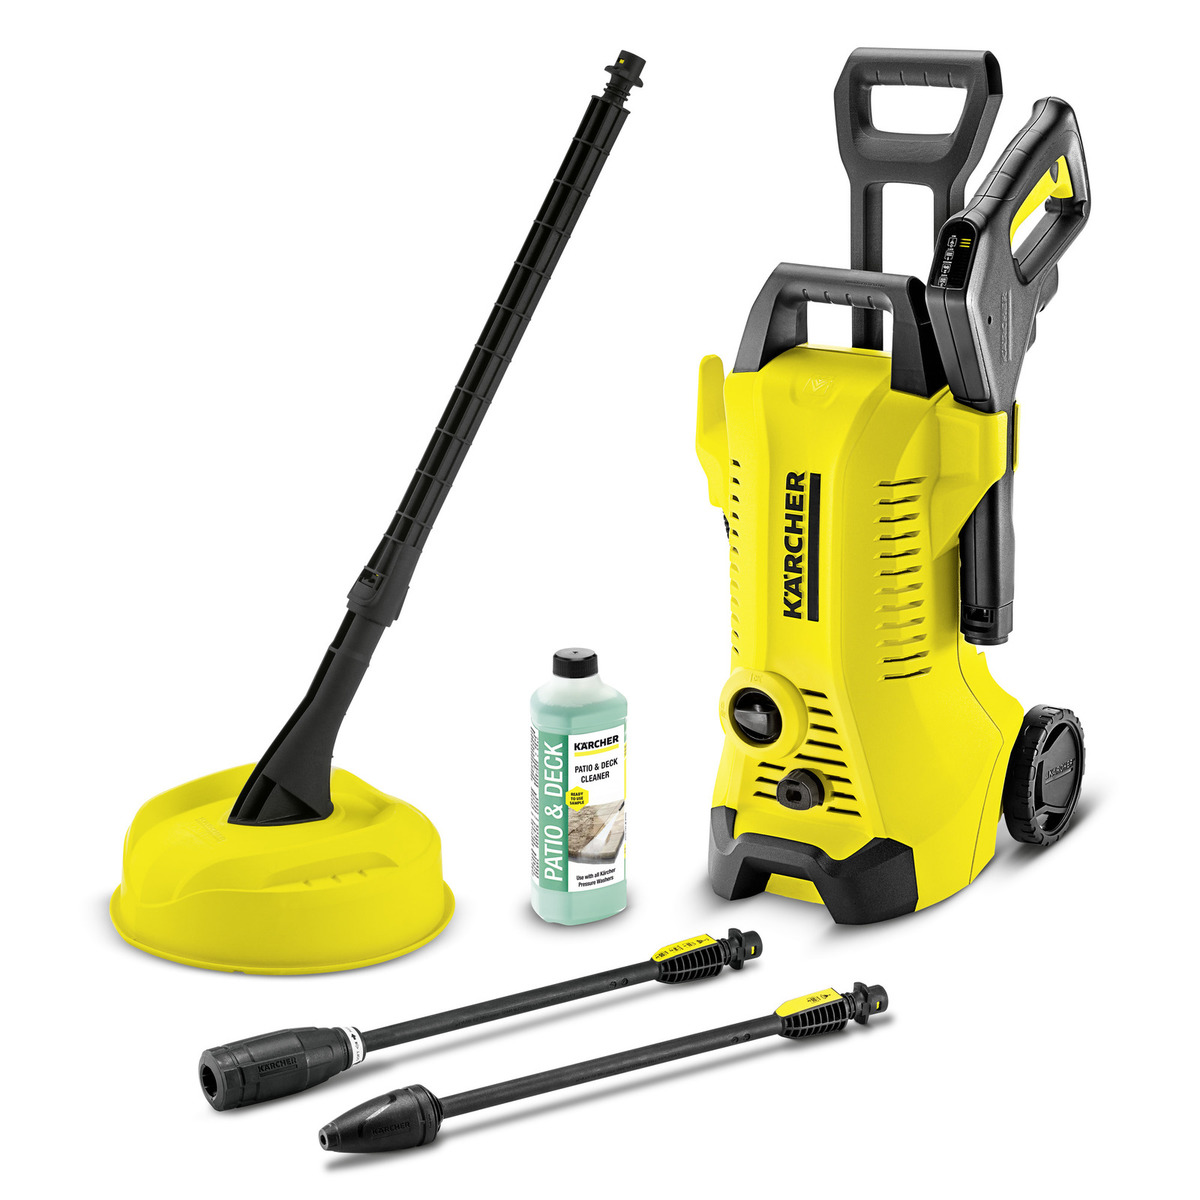 How to Clean Your Car and Bicycle with the Karcher K3 Premium Power Control  Home - Karcher Center Powercare